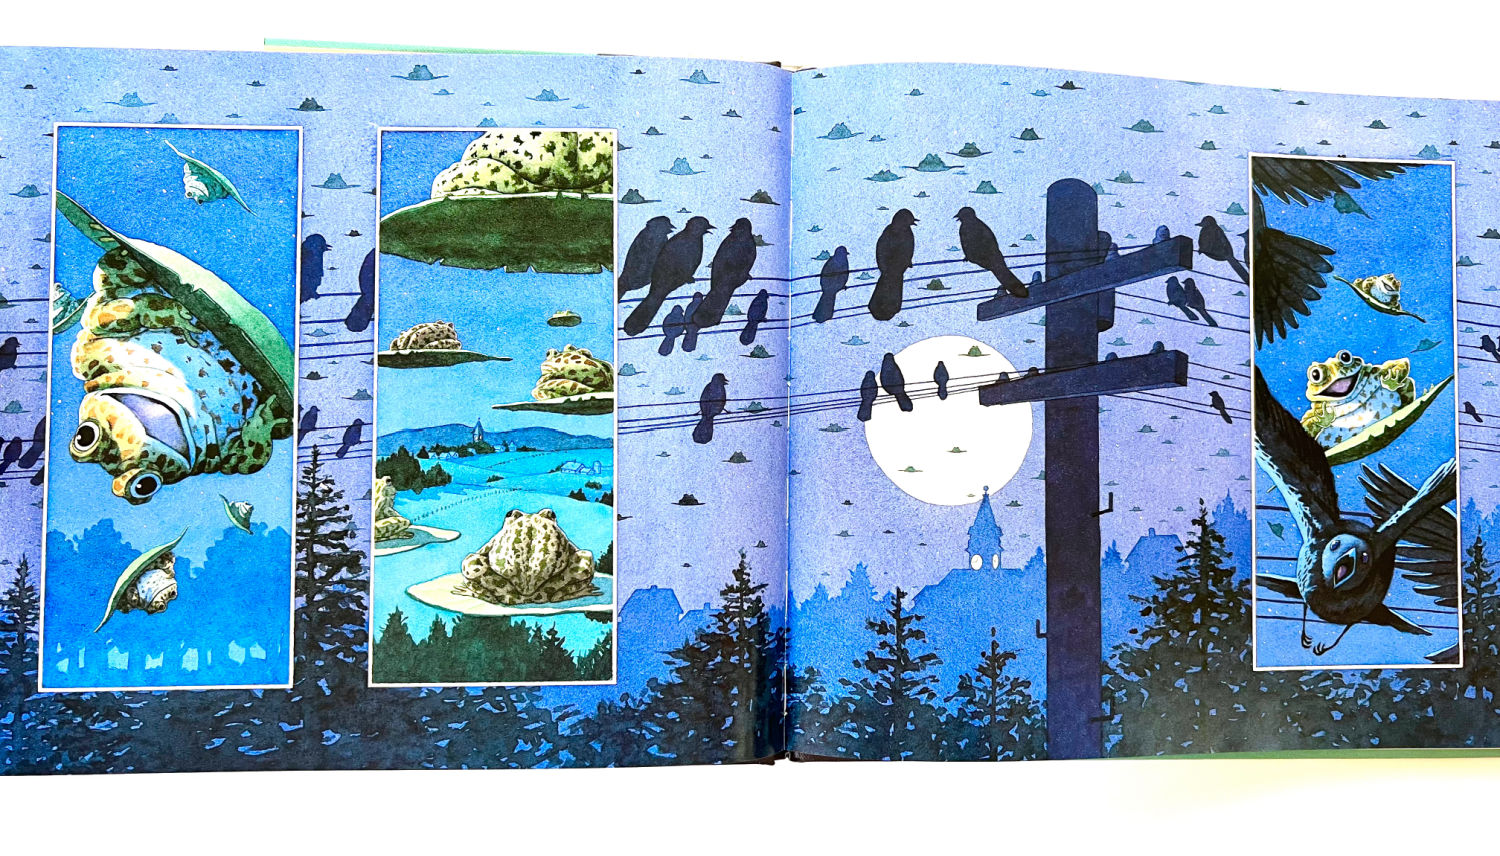 Tuesday wordless picture book page spread